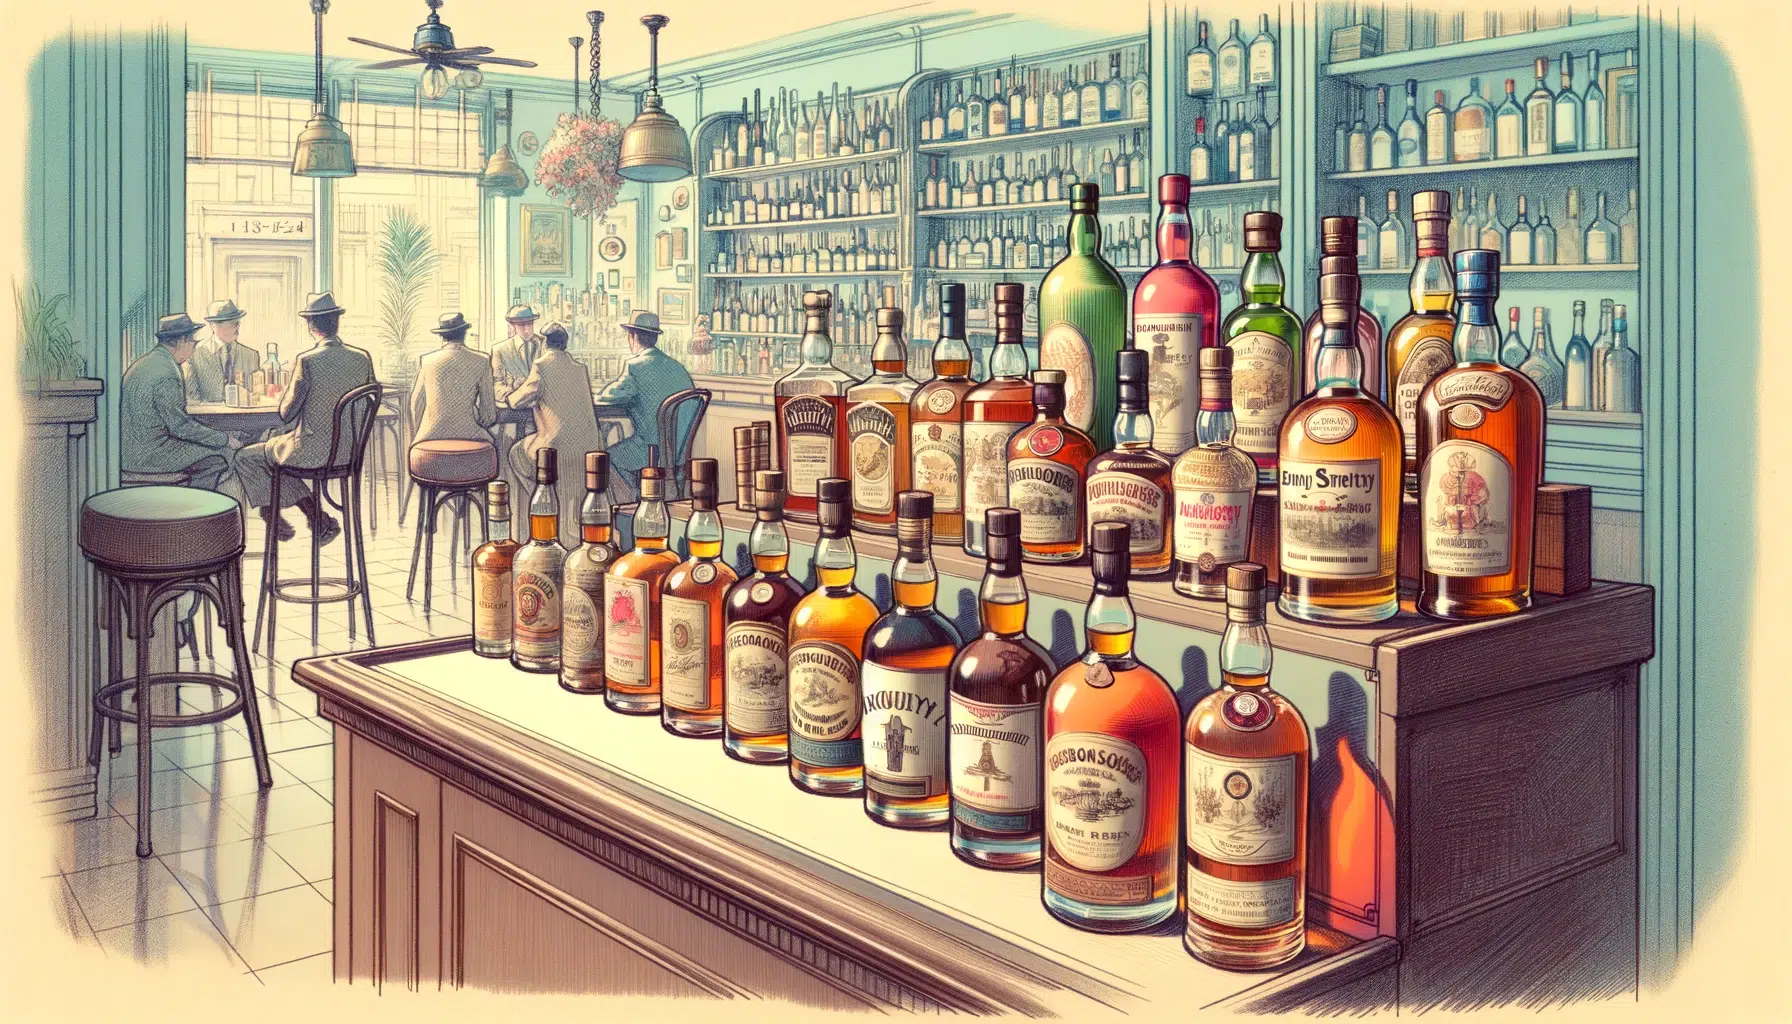 Vintage bar scene with patrons and array of bottles.